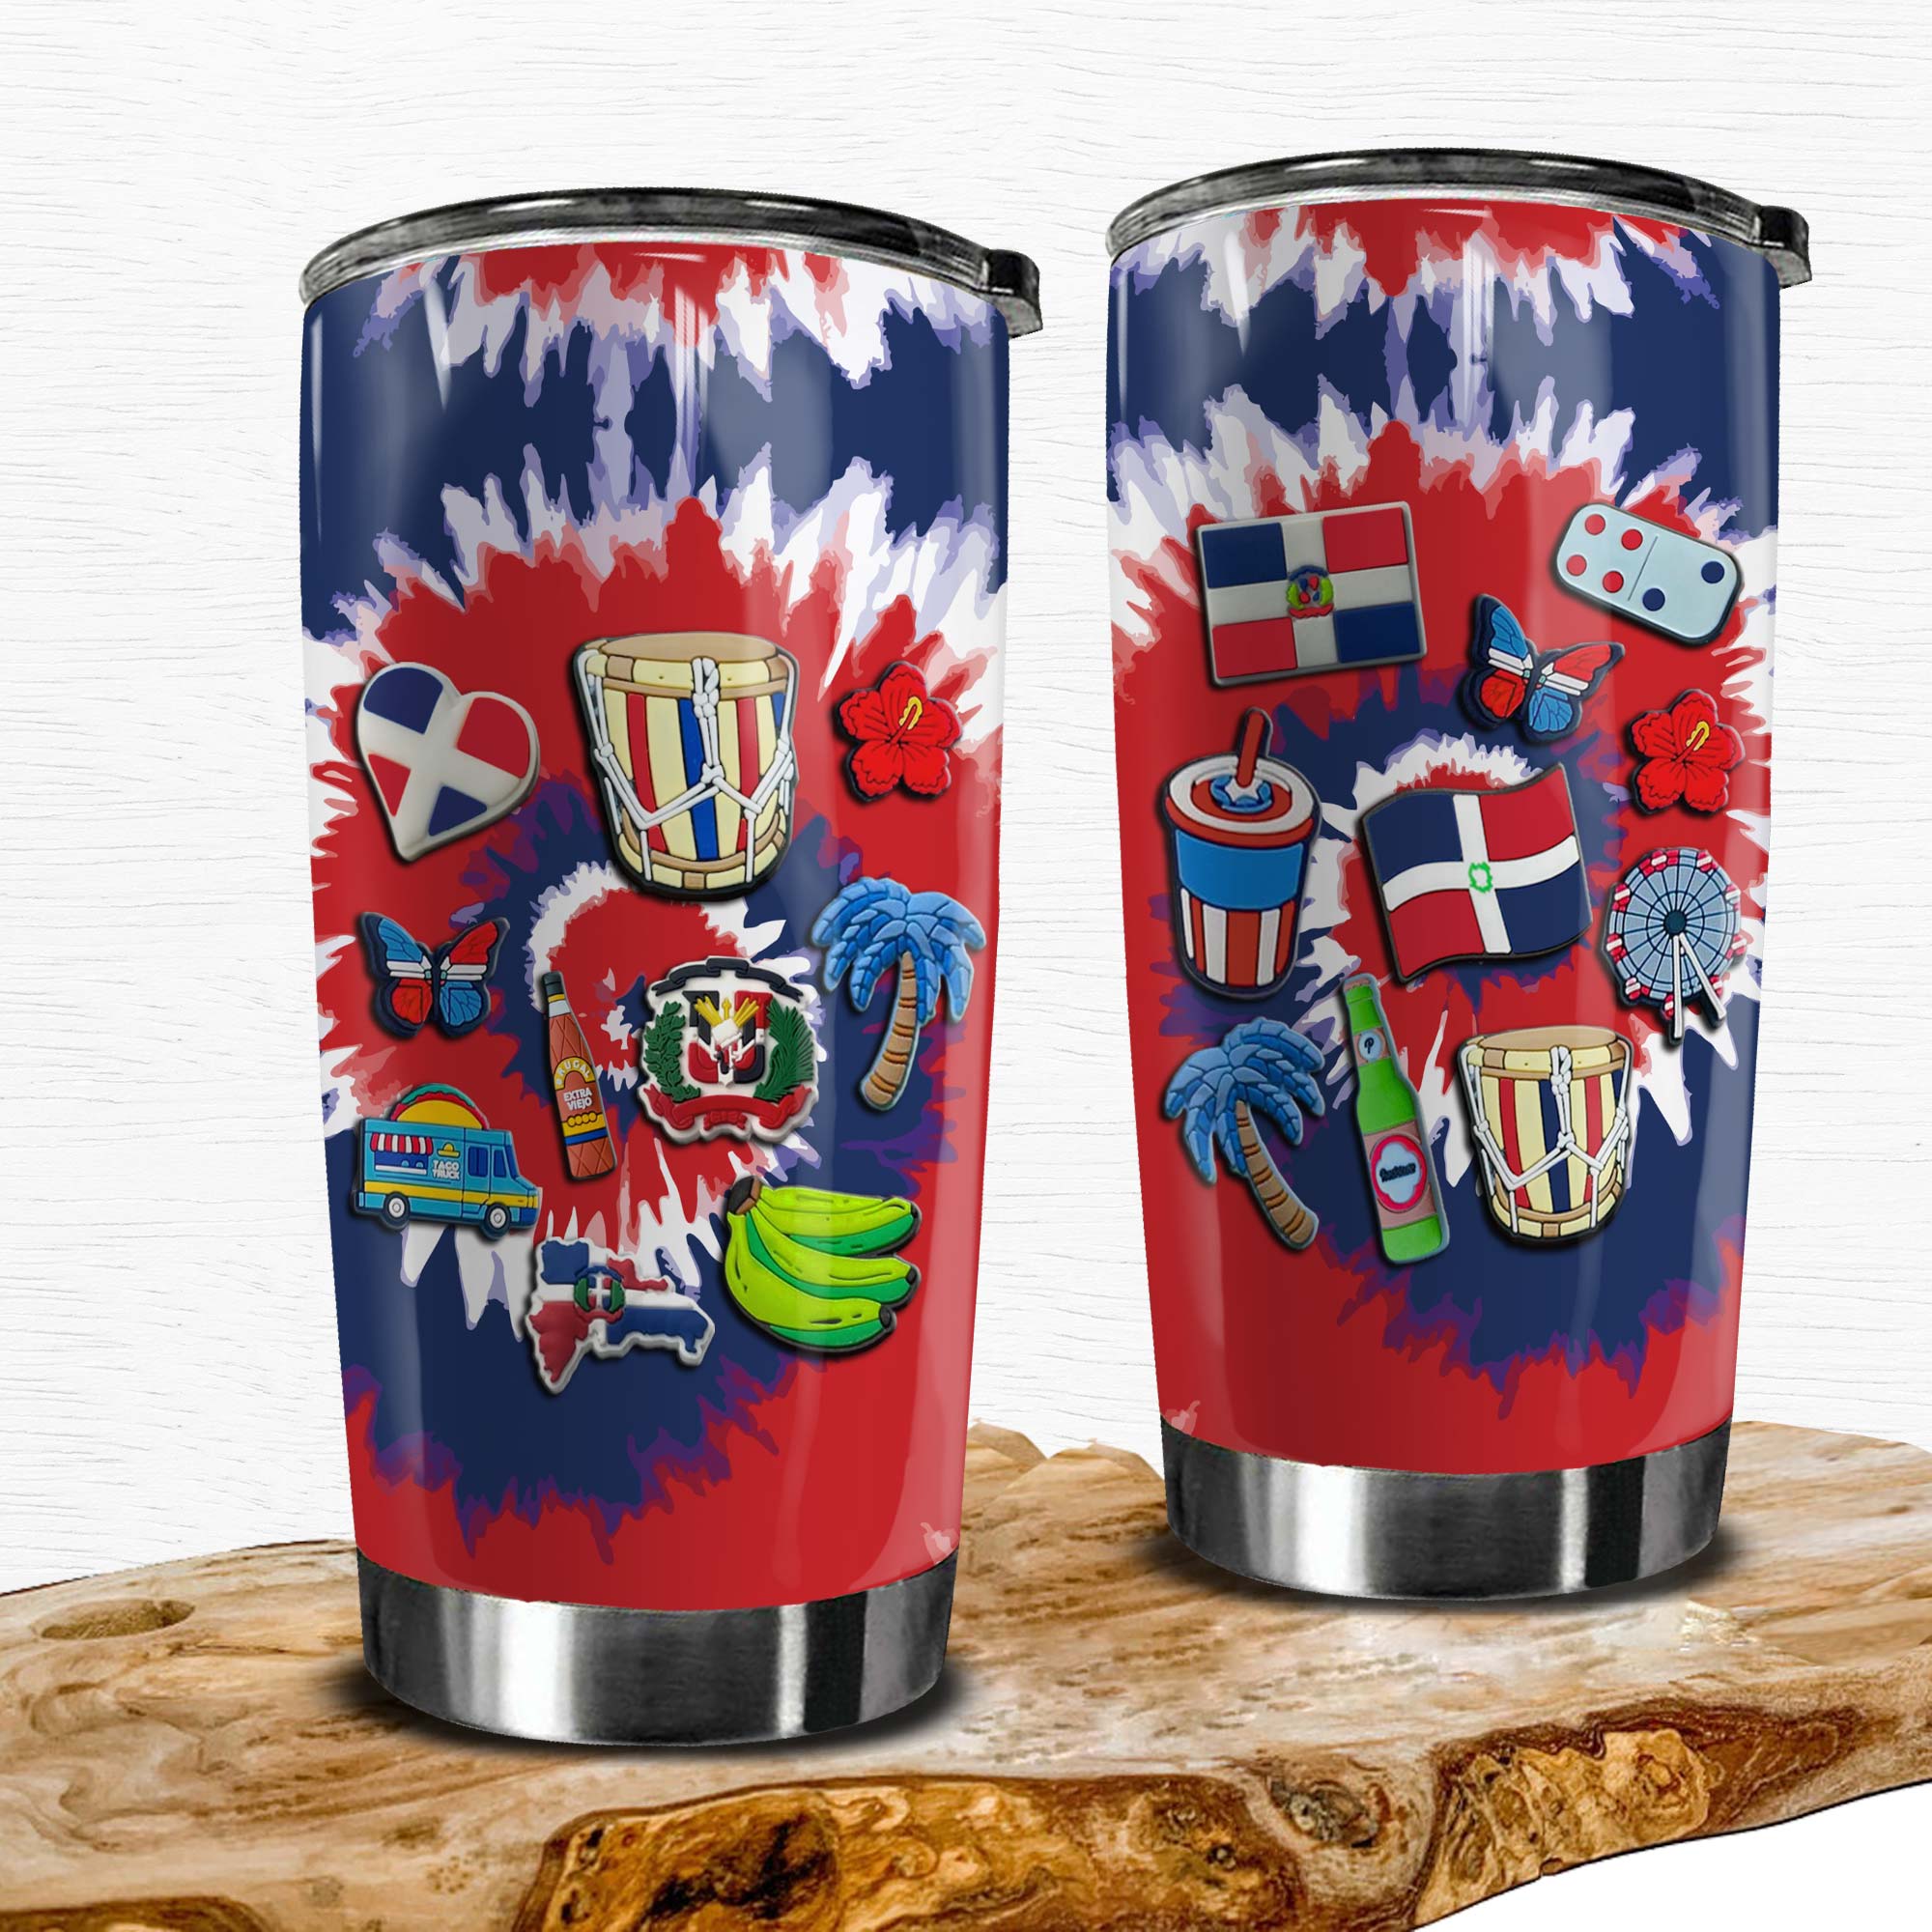 Dominican Personalized Tumbler With Symbols Tie Dye